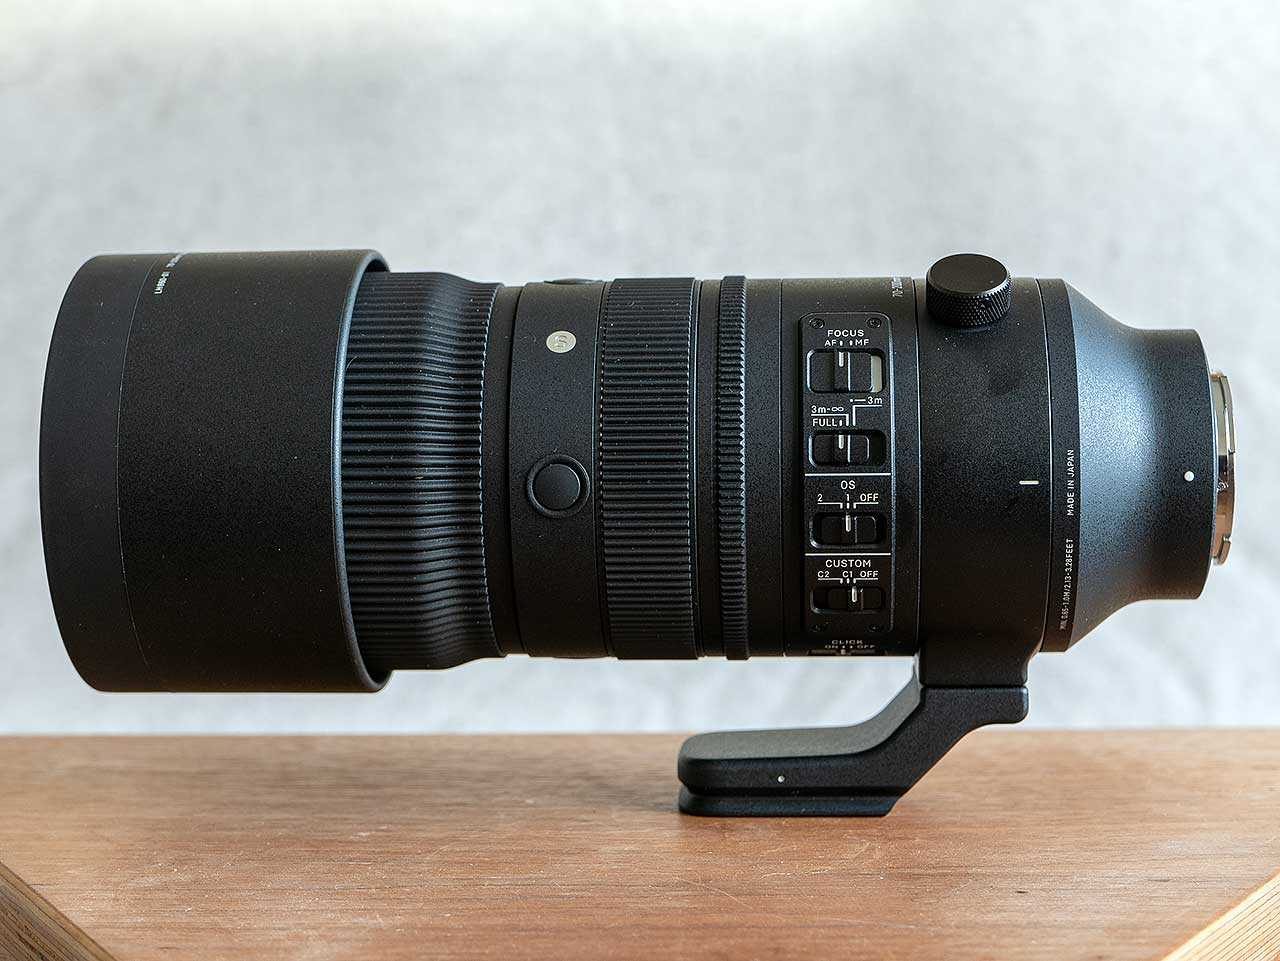 Sigma 70-200mm F2.8 DG DN OS Sports Review